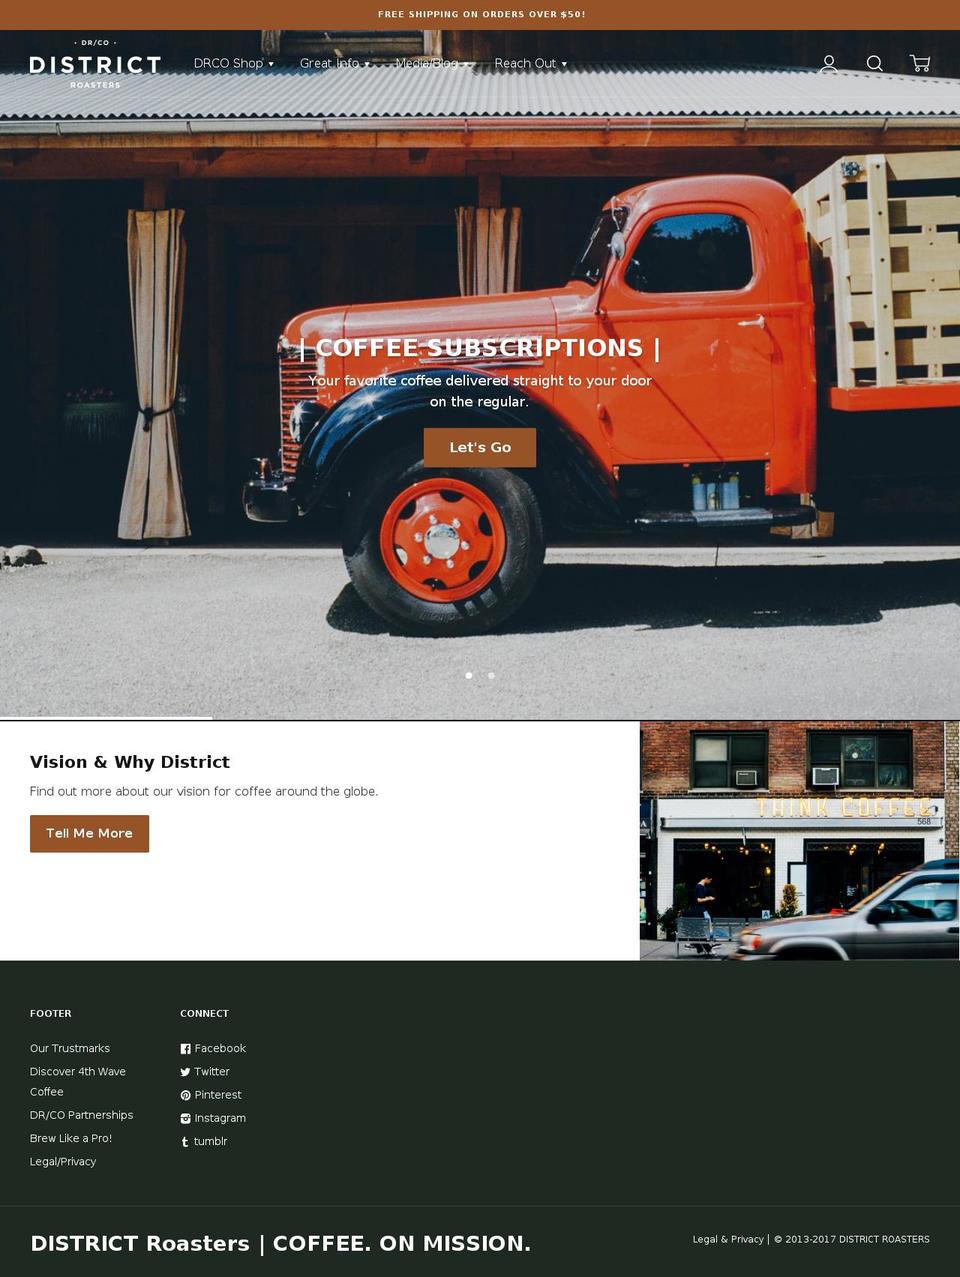 Ira Shopify theme site example districtroasters.org